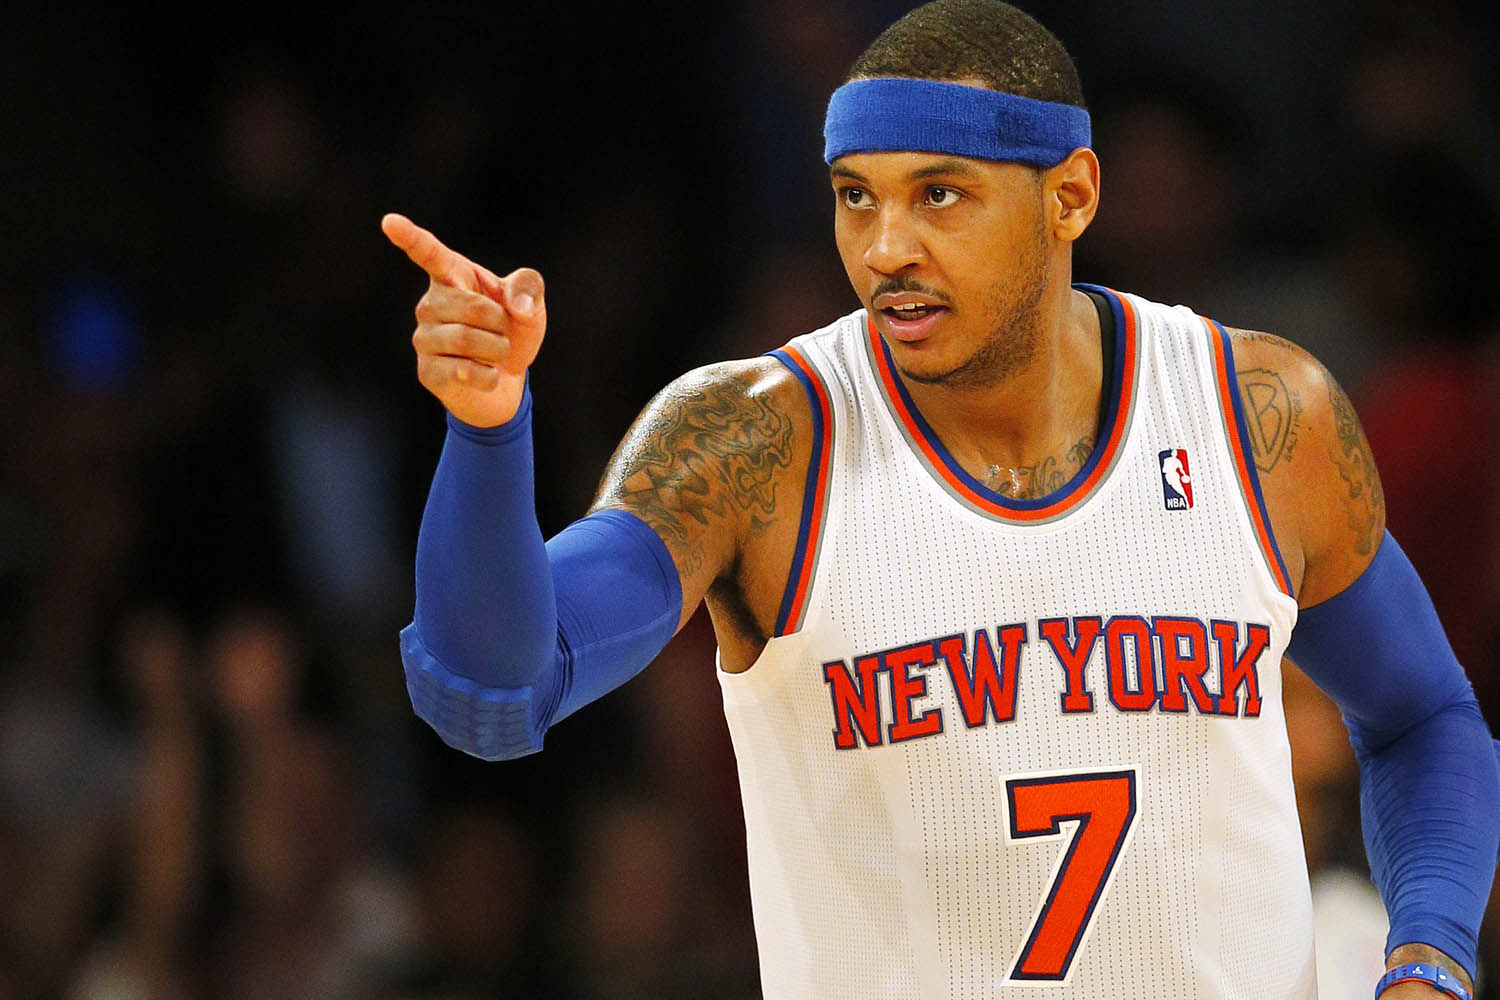 Let's discuss Carmelo Anthony's Hall of 